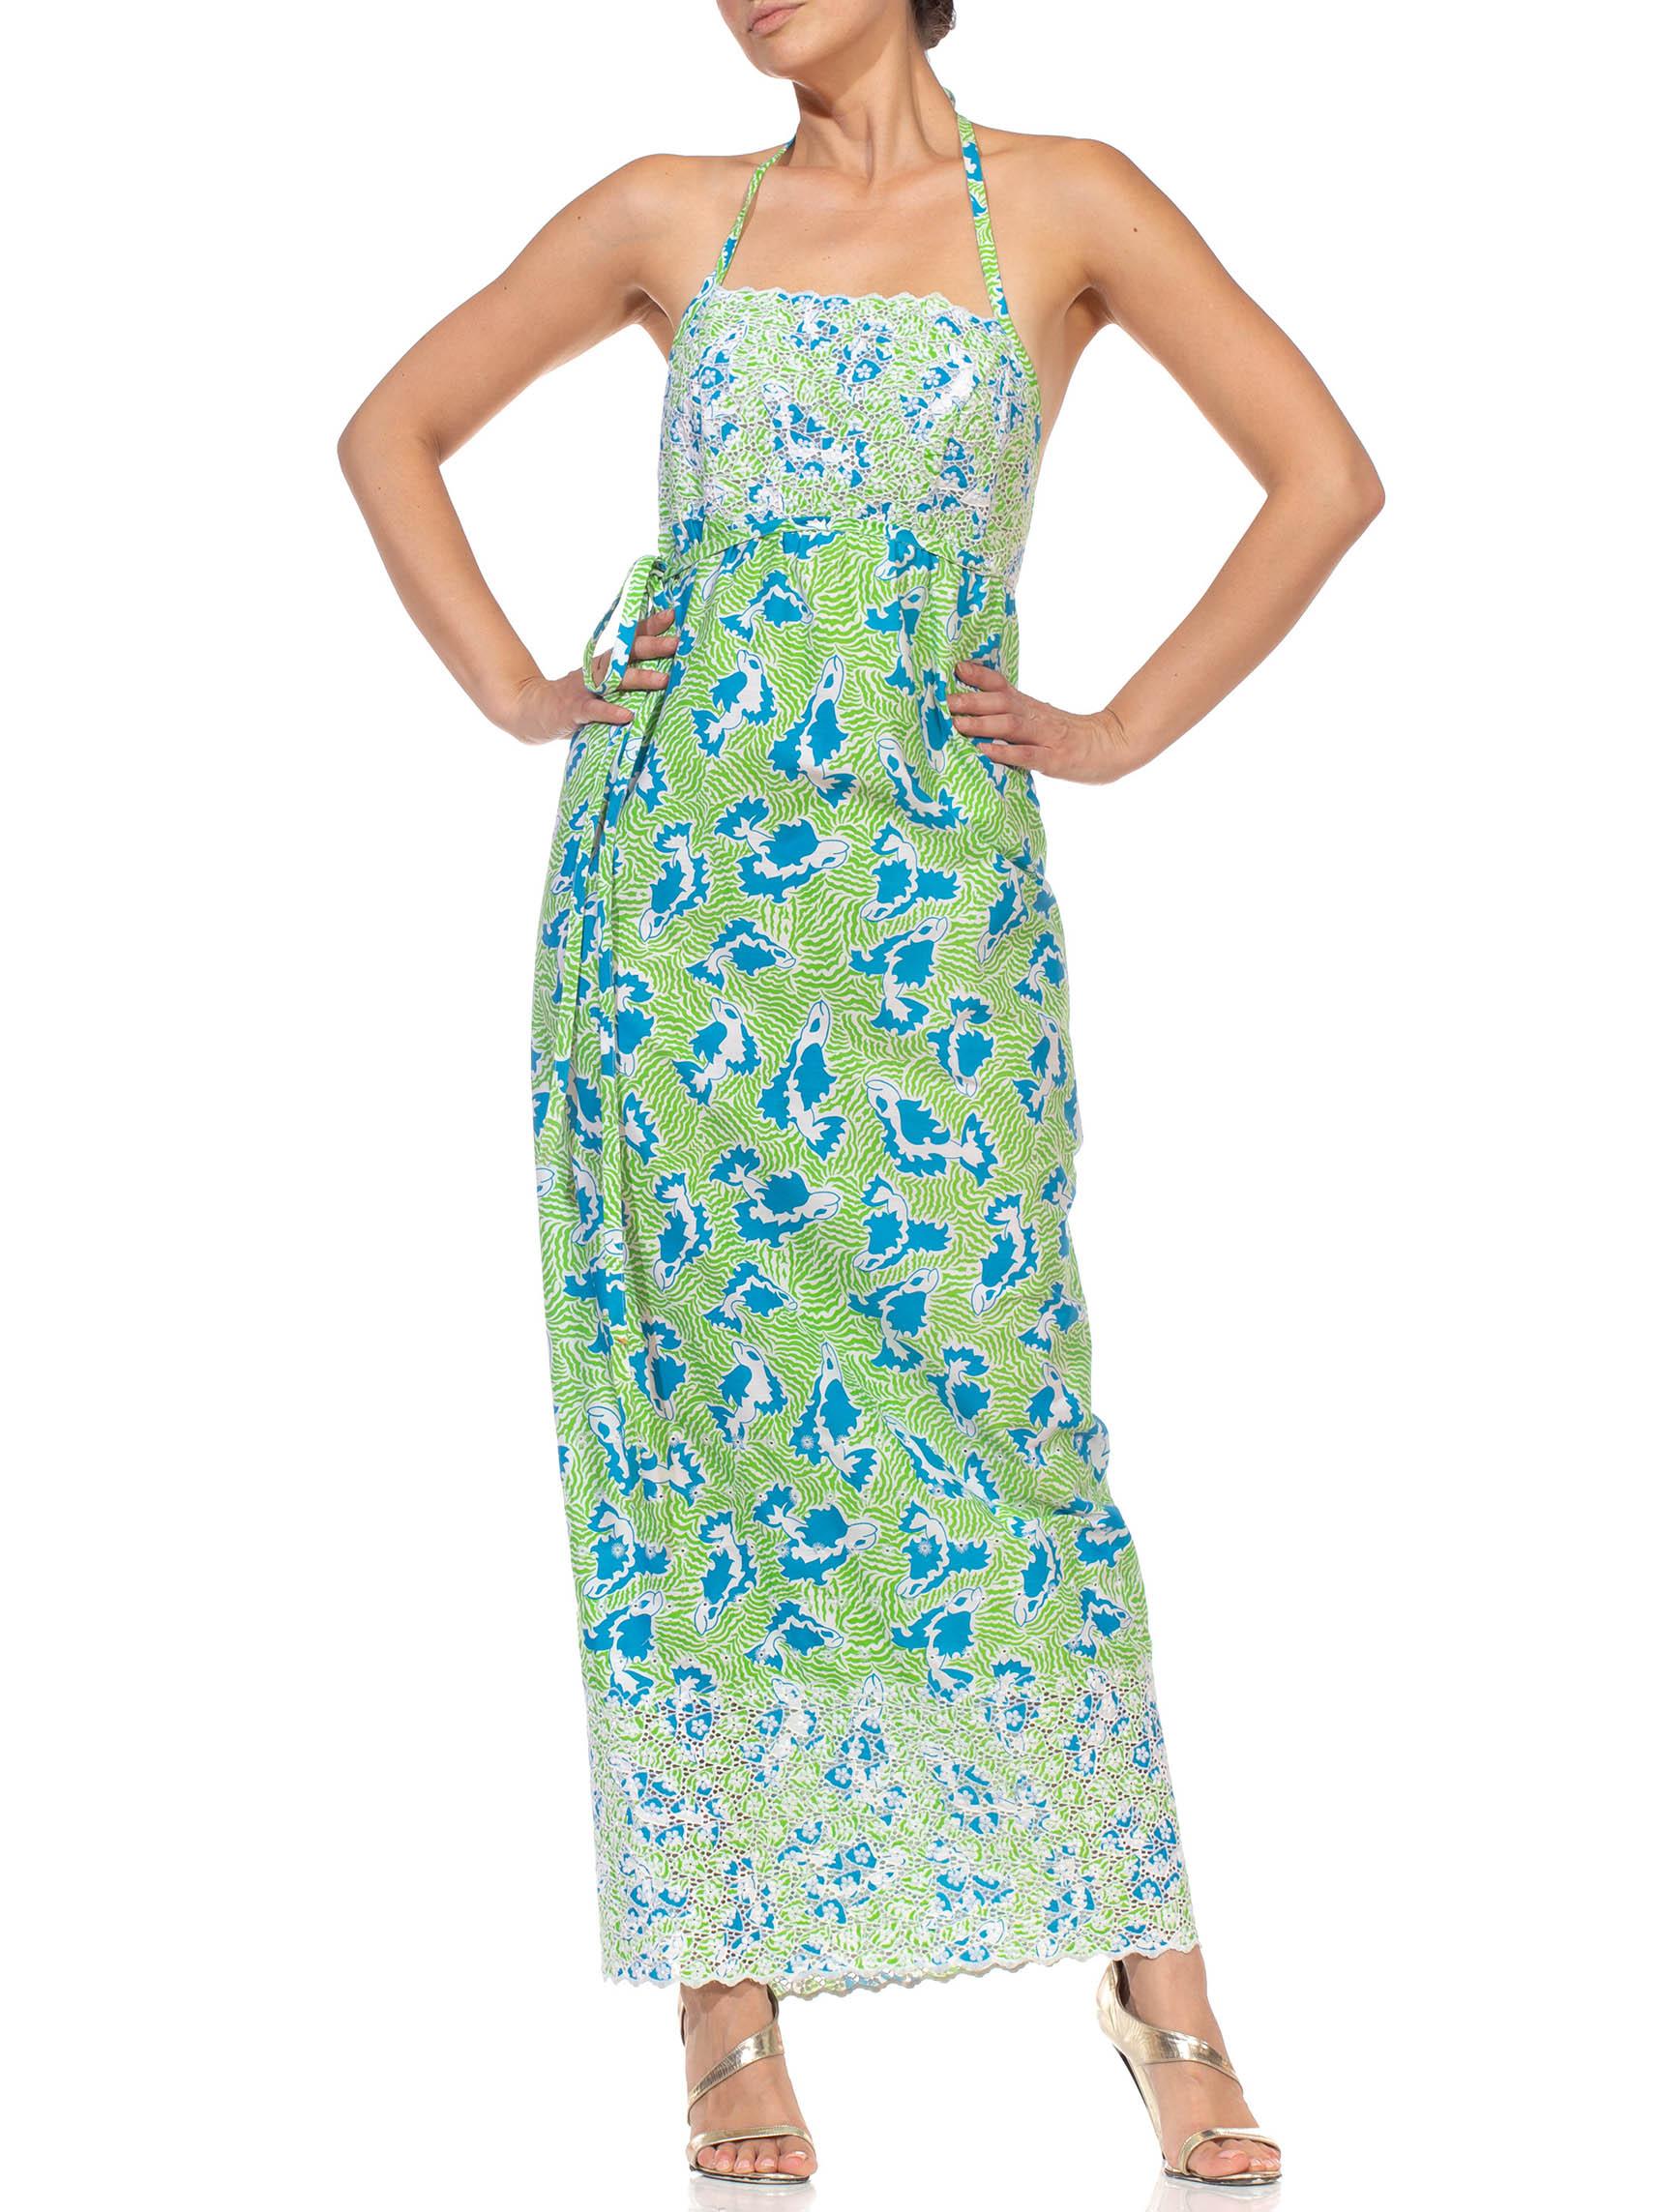 Women's 1970S LILLY PULITZER Green Blue Poly/Cotton Wrap Halter Back Dress For Sale